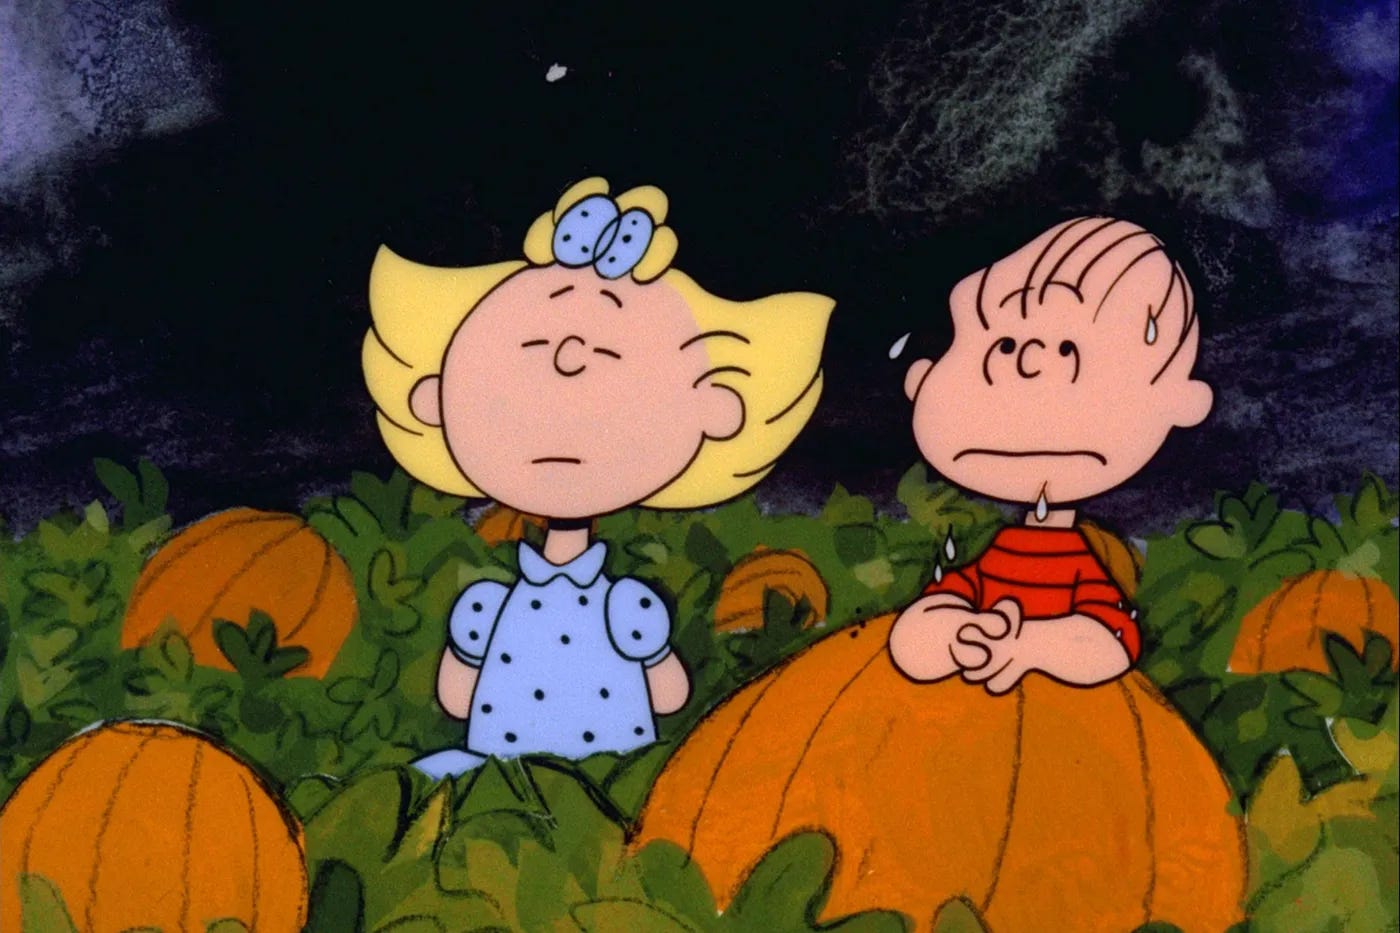 Still from It's the Great Pumpkin Charlie Brown. Sally and Linus in the pumpkin patch waiting for The Great Pumpkin. Sally looks like she is trying to keep her cool. Linus is nervous.